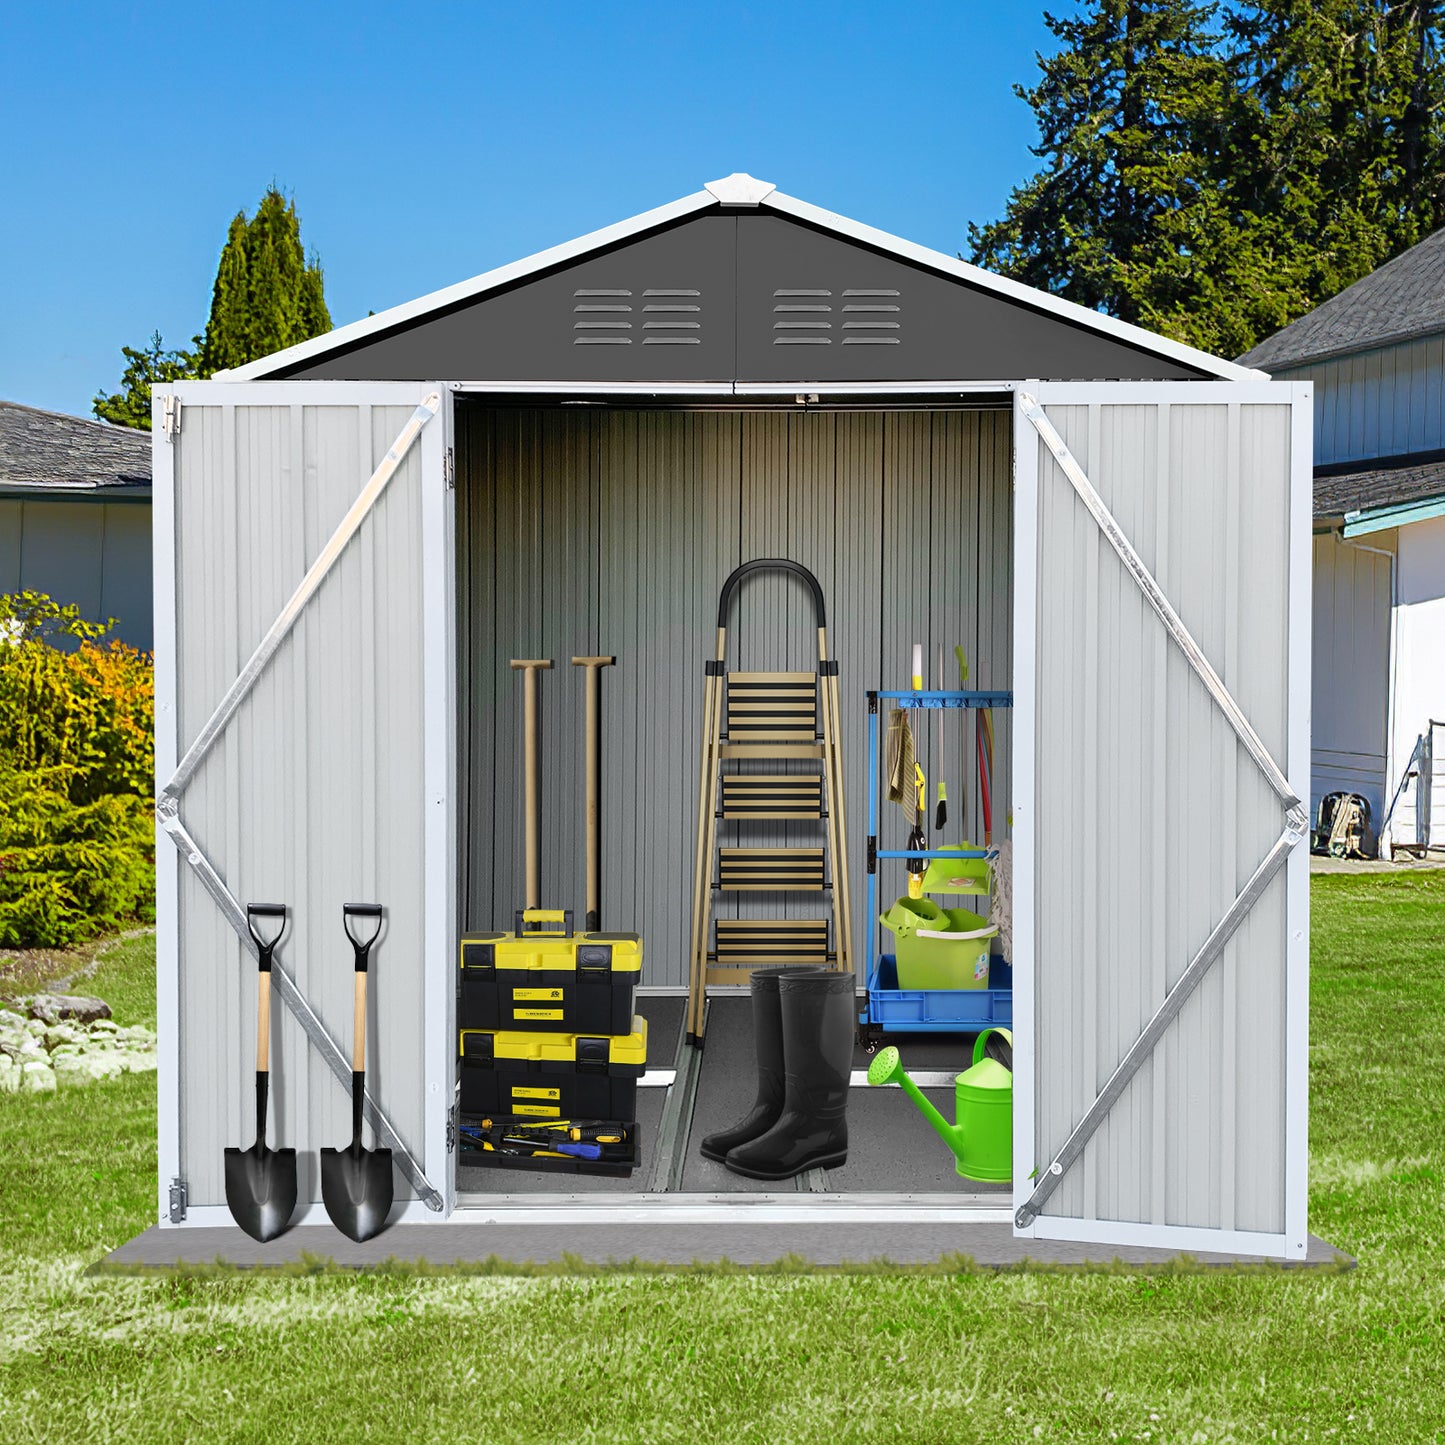 5' x 3' Outdoor Storage Shed, Metal Garden Shed with Single Lockable Door, Tools Storage Shed for Backyard, Patio, Lawn, Y011